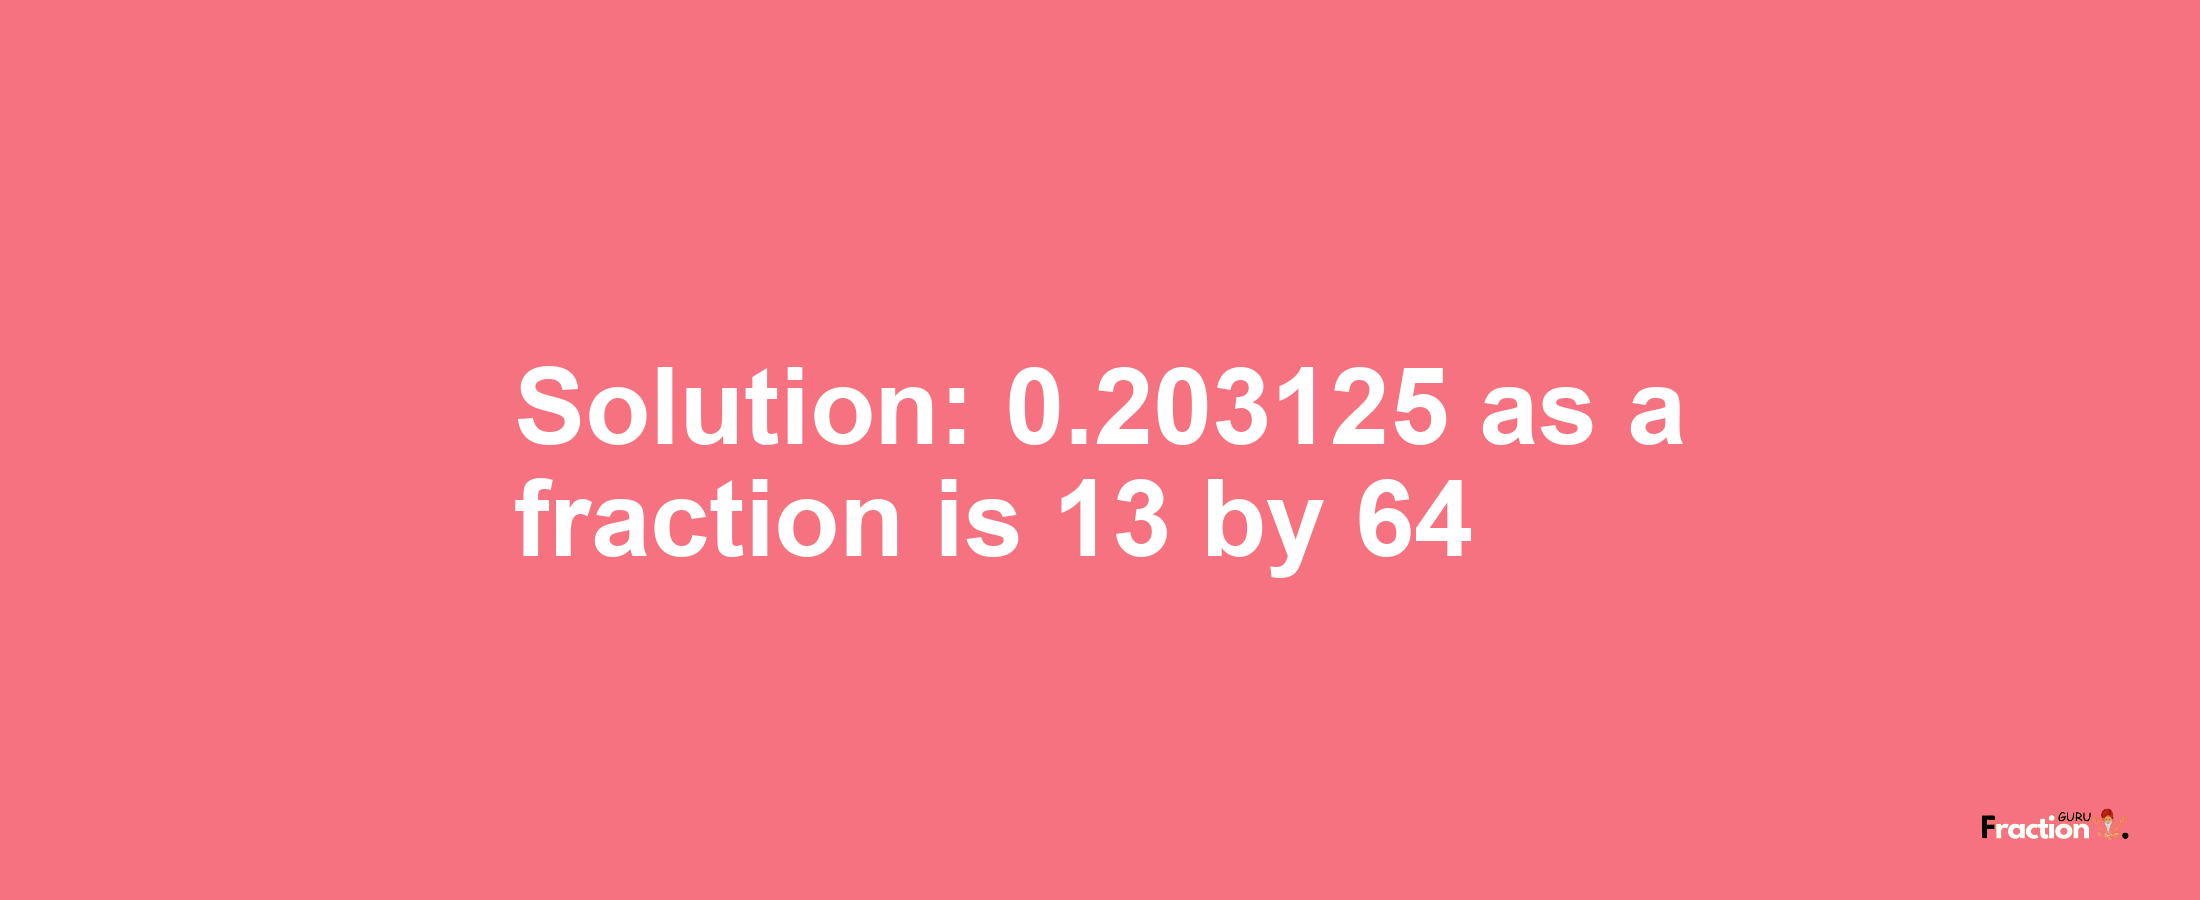 Solution:0.203125 as a fraction is 13/64